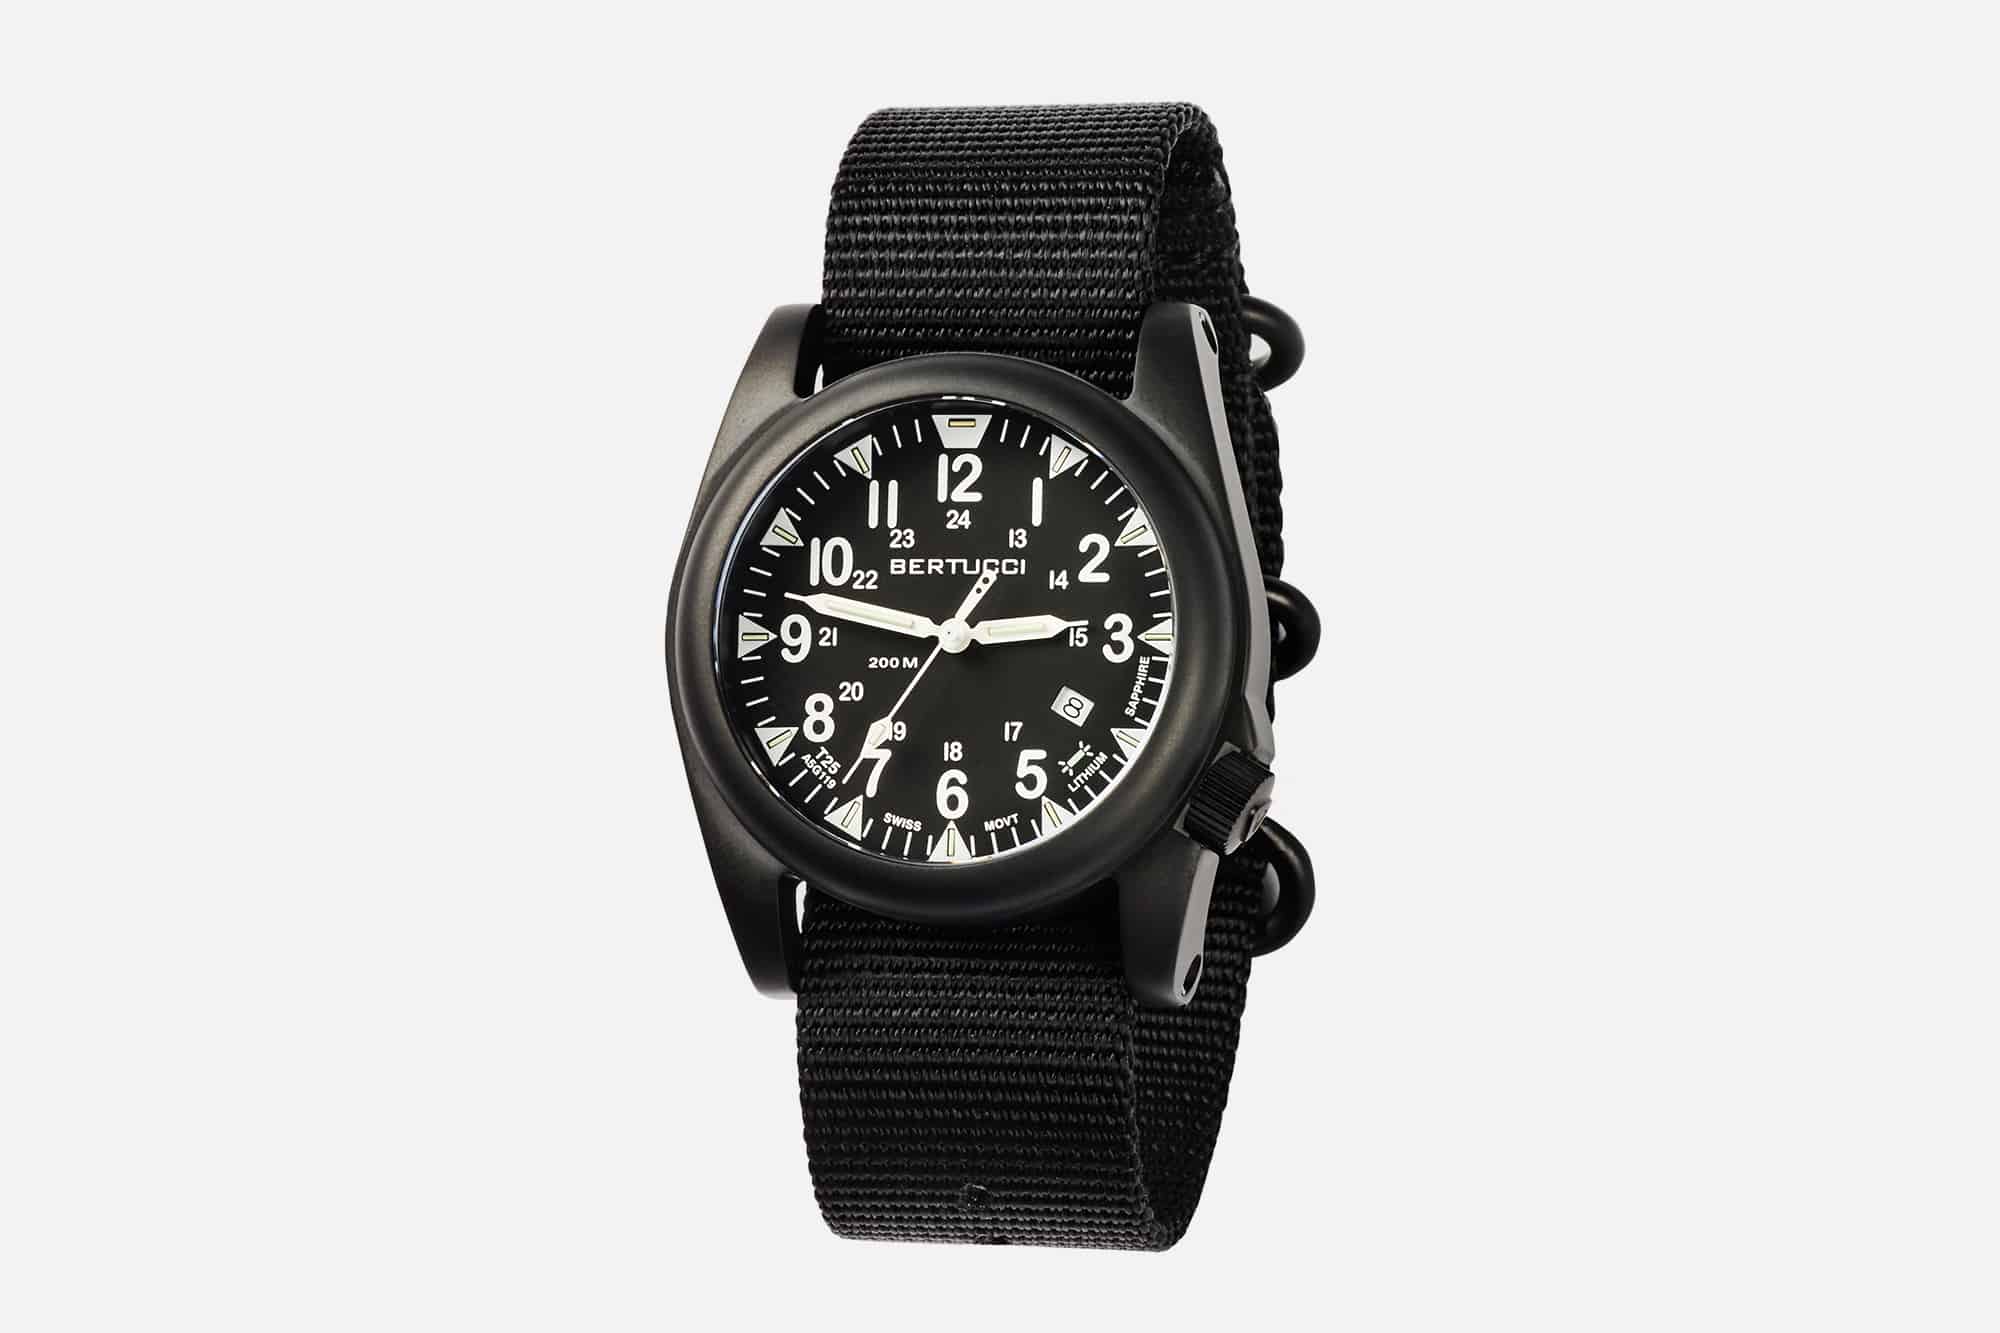 Bertucci Introduces the Ballista Line, A Series of Stealthy, Tactical Field Watches